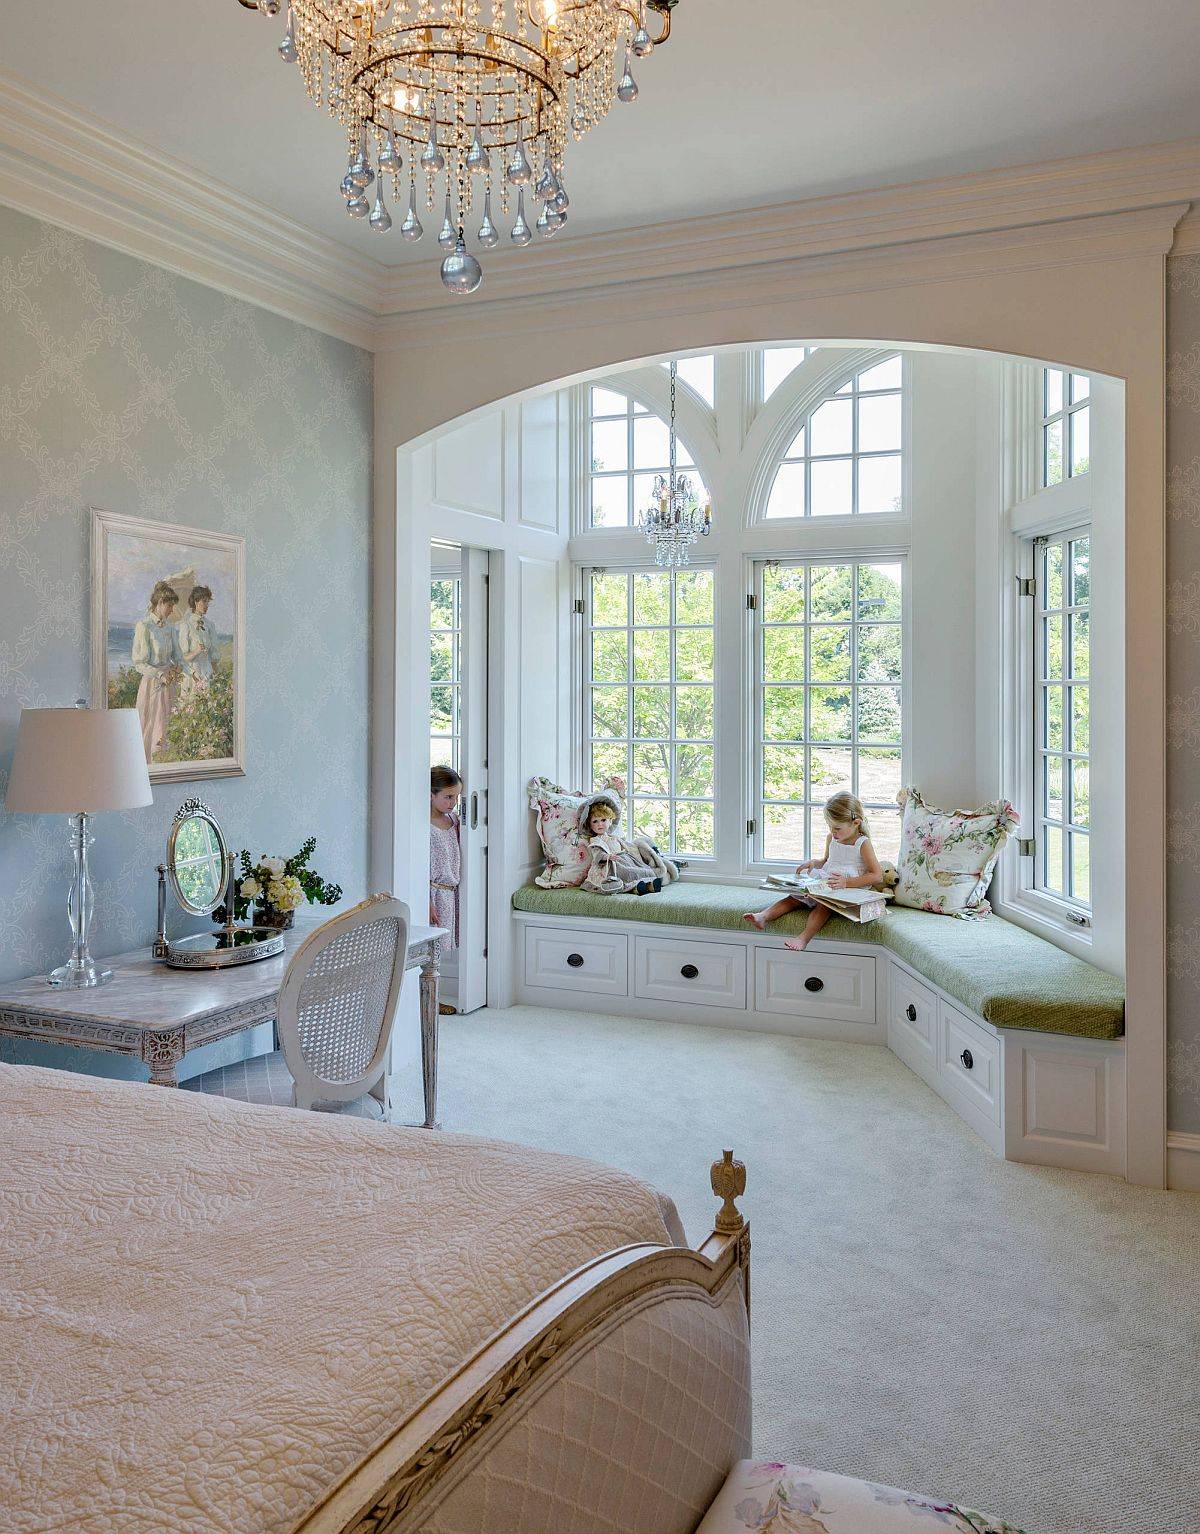 Turn the odd corner or forgotten niche in the bedroom into a fabulous and space-savvy window seat